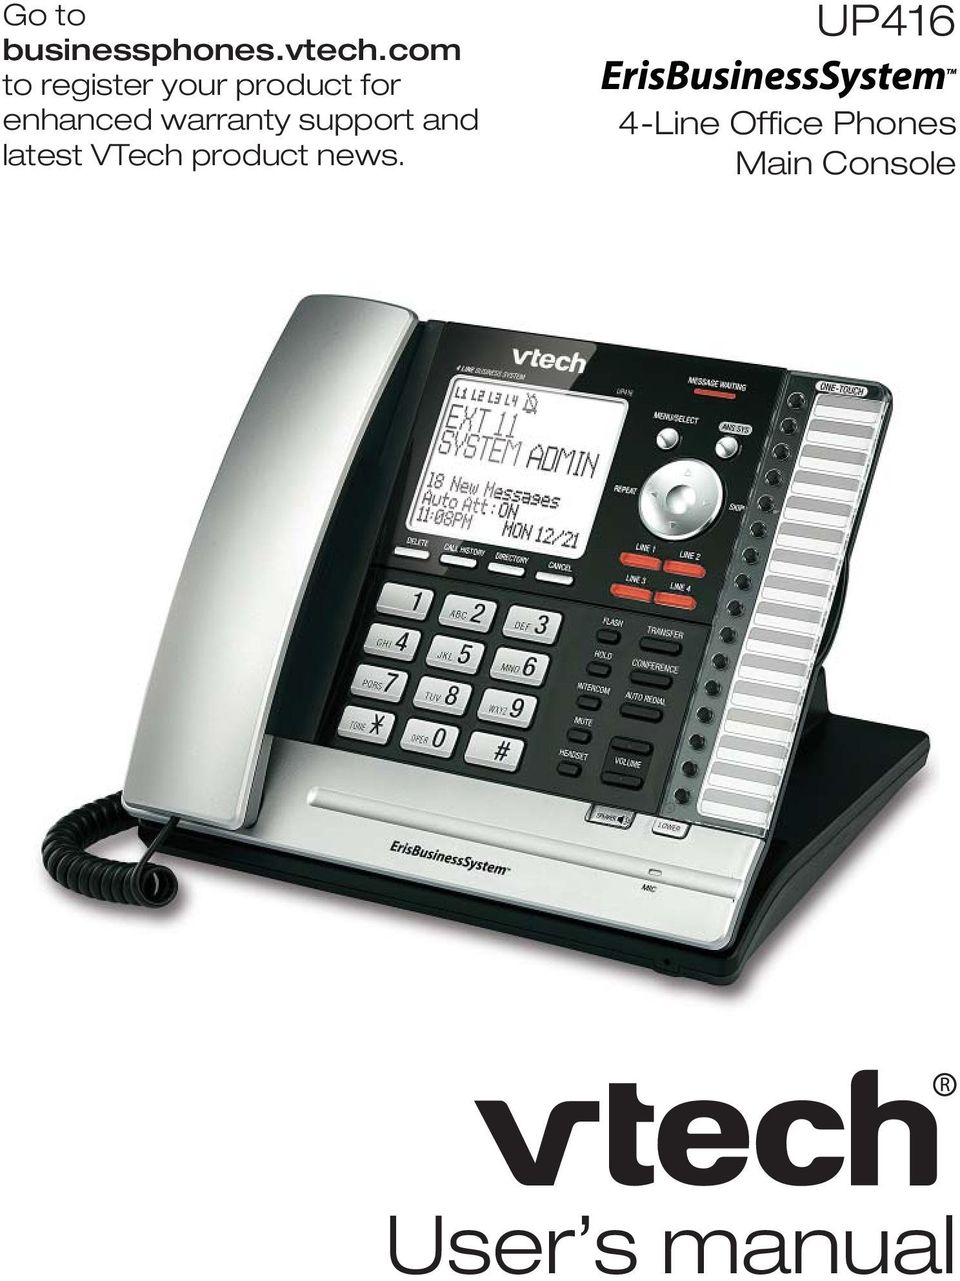 warranty support and latest VTech product